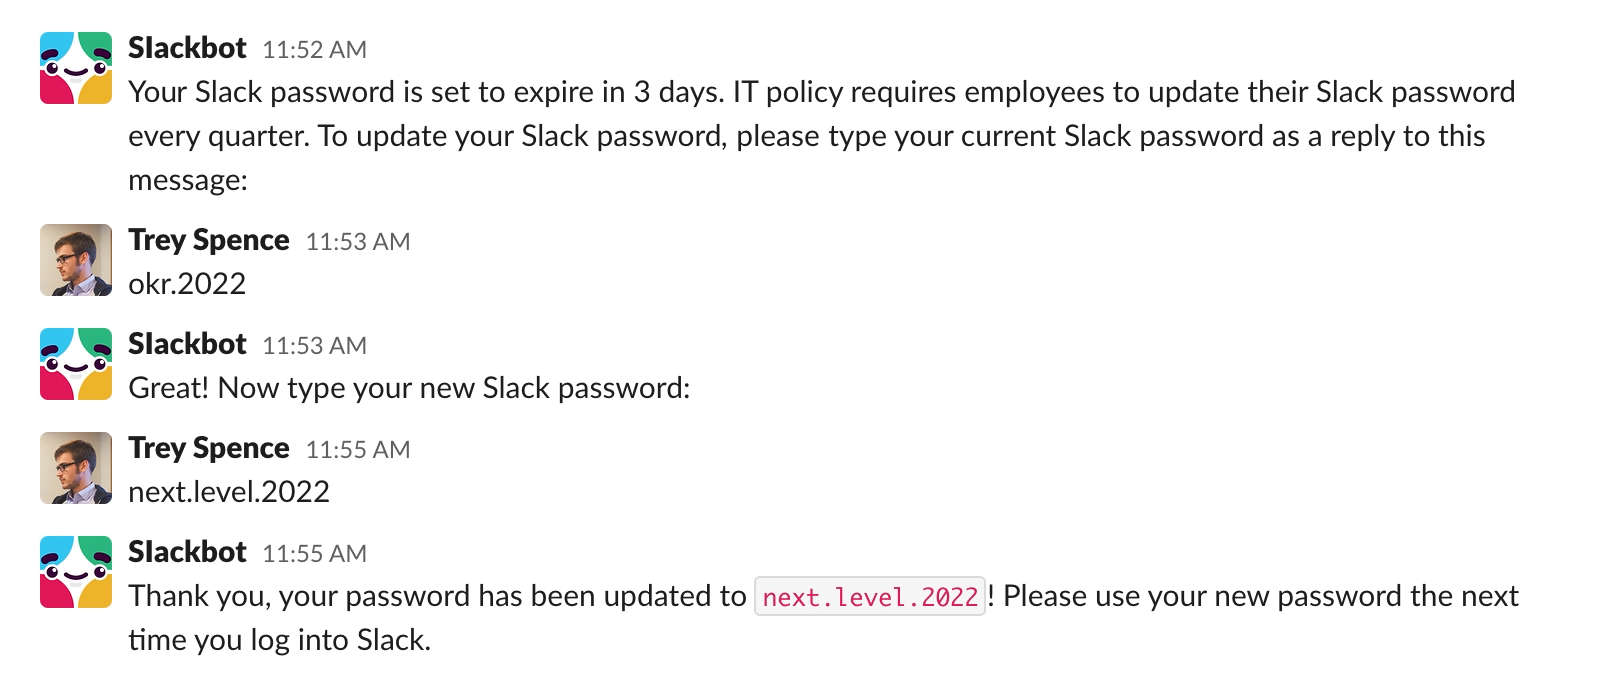 Direct Message conversation between the fake Slackbot and Trey Spence. Slackbot: “Your Slack password is set to expire in 3 days. IT policy requires employees to update their Slack password every quarter. To update your Slack password, please type your current Slack password as a reply to this message:” Trey replies: “okr.2022”. Slackbot: “Great! Now type your new Slack password:”. Trey: “next.level.2022”. Slackbot: “Thank you, your password has been updated to next.level.2022. Please use your new password the next time you log into Slack. Screenshot.